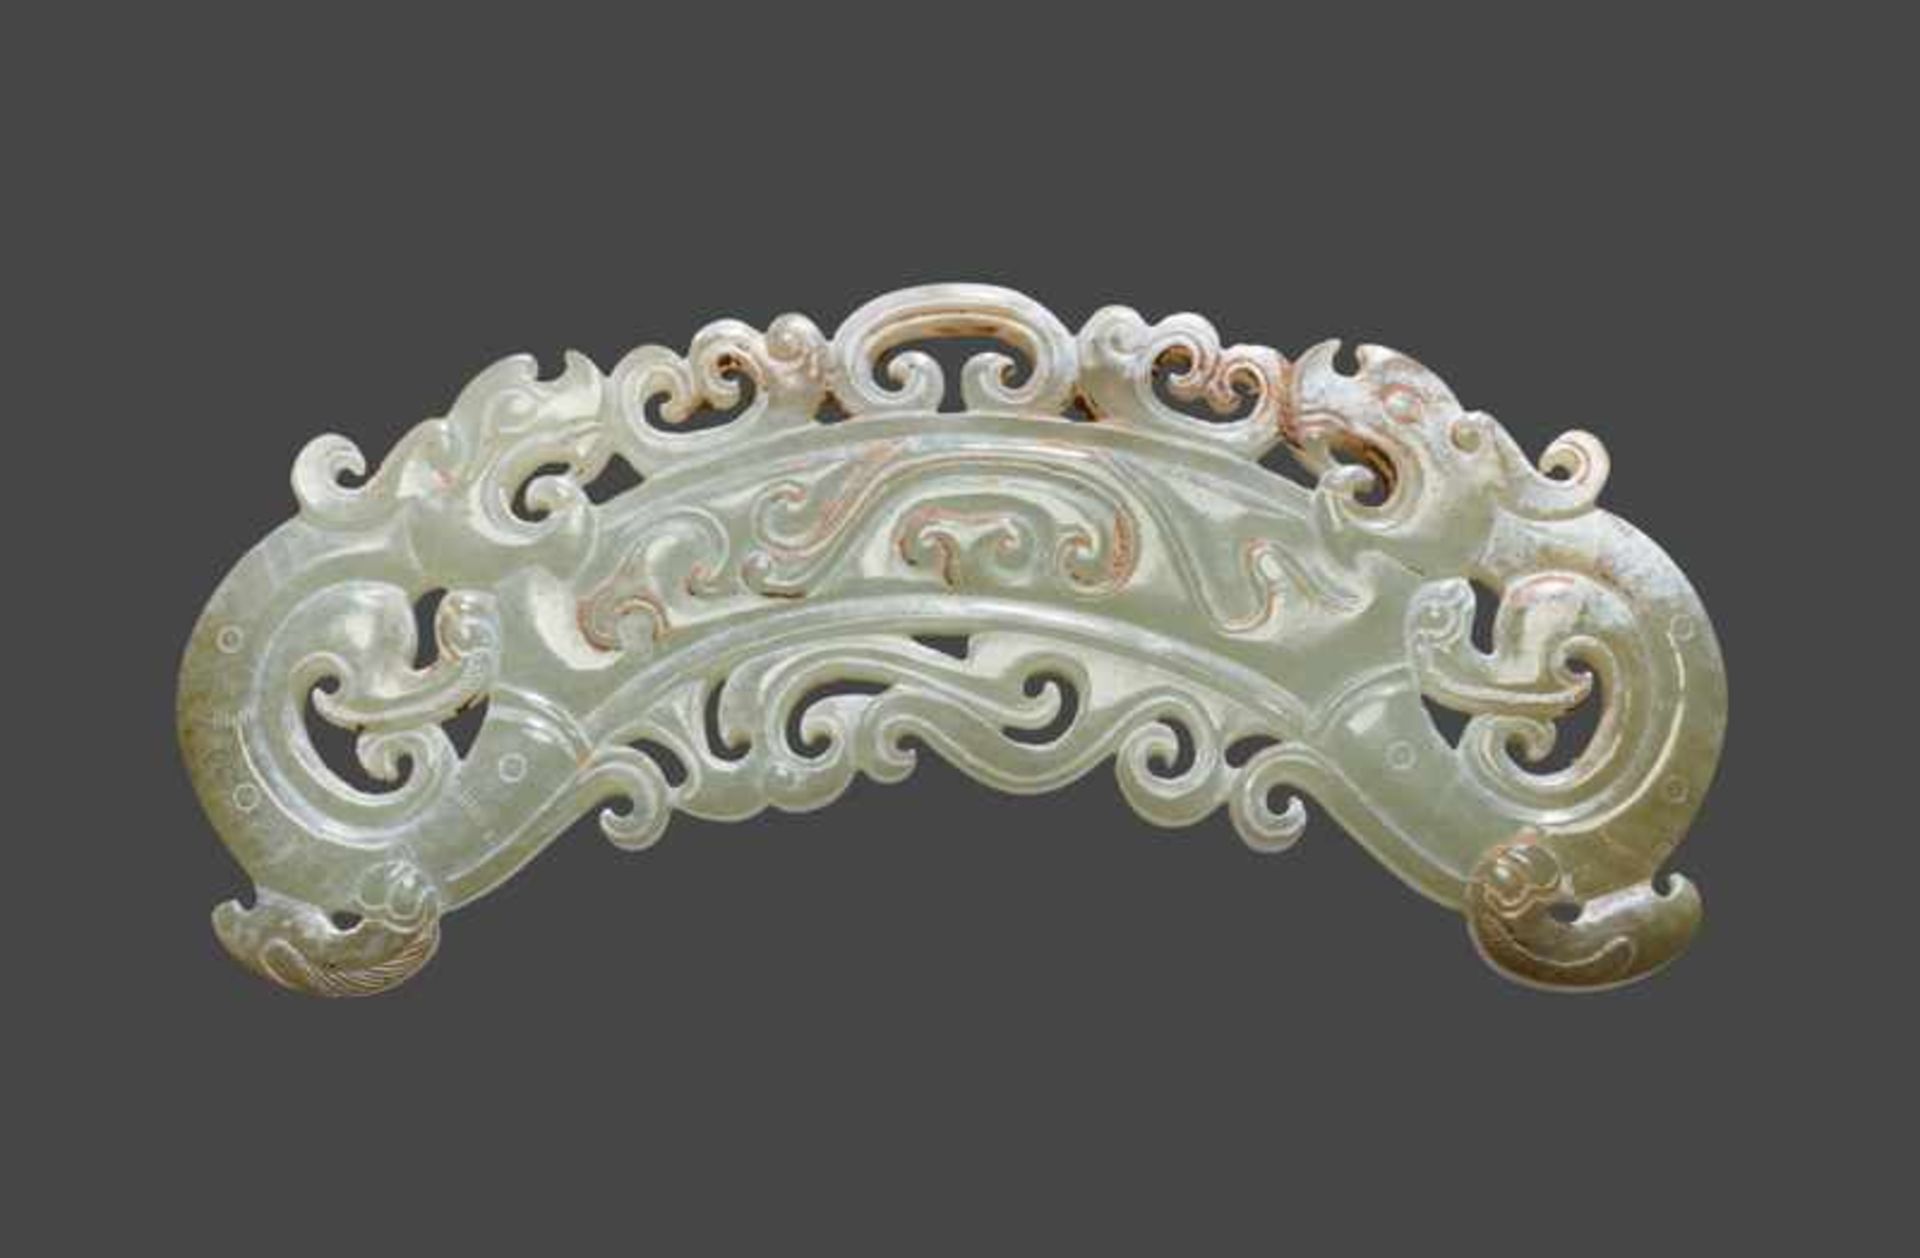 DECORATIVE PENDANT HUANG WITH DRAGONS Jade. China, Eastern Han, 25 - 220 ADThis very elaborately